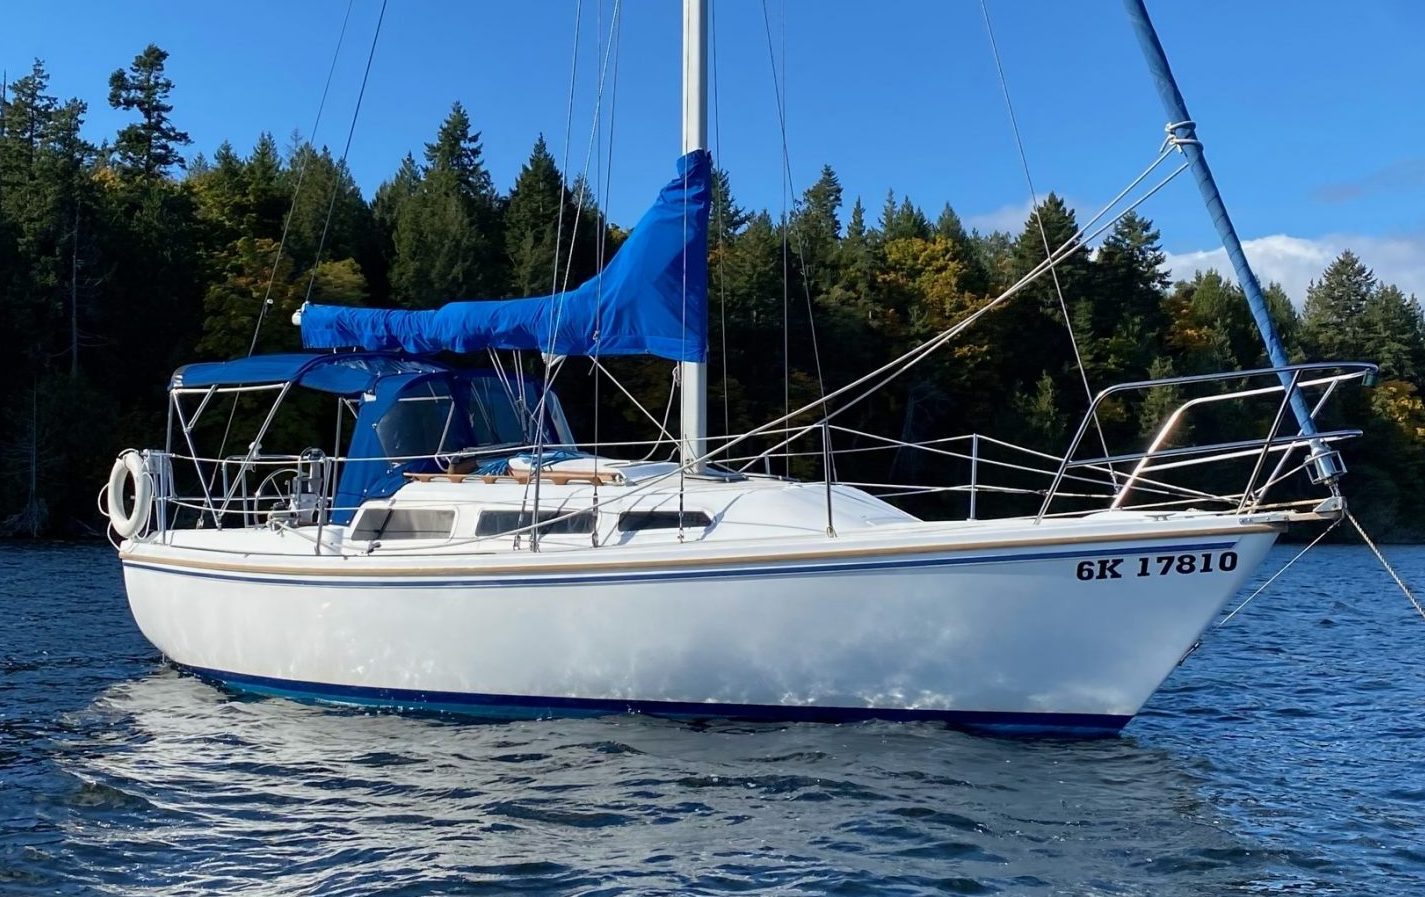 27 ft catalina sailboat for sale